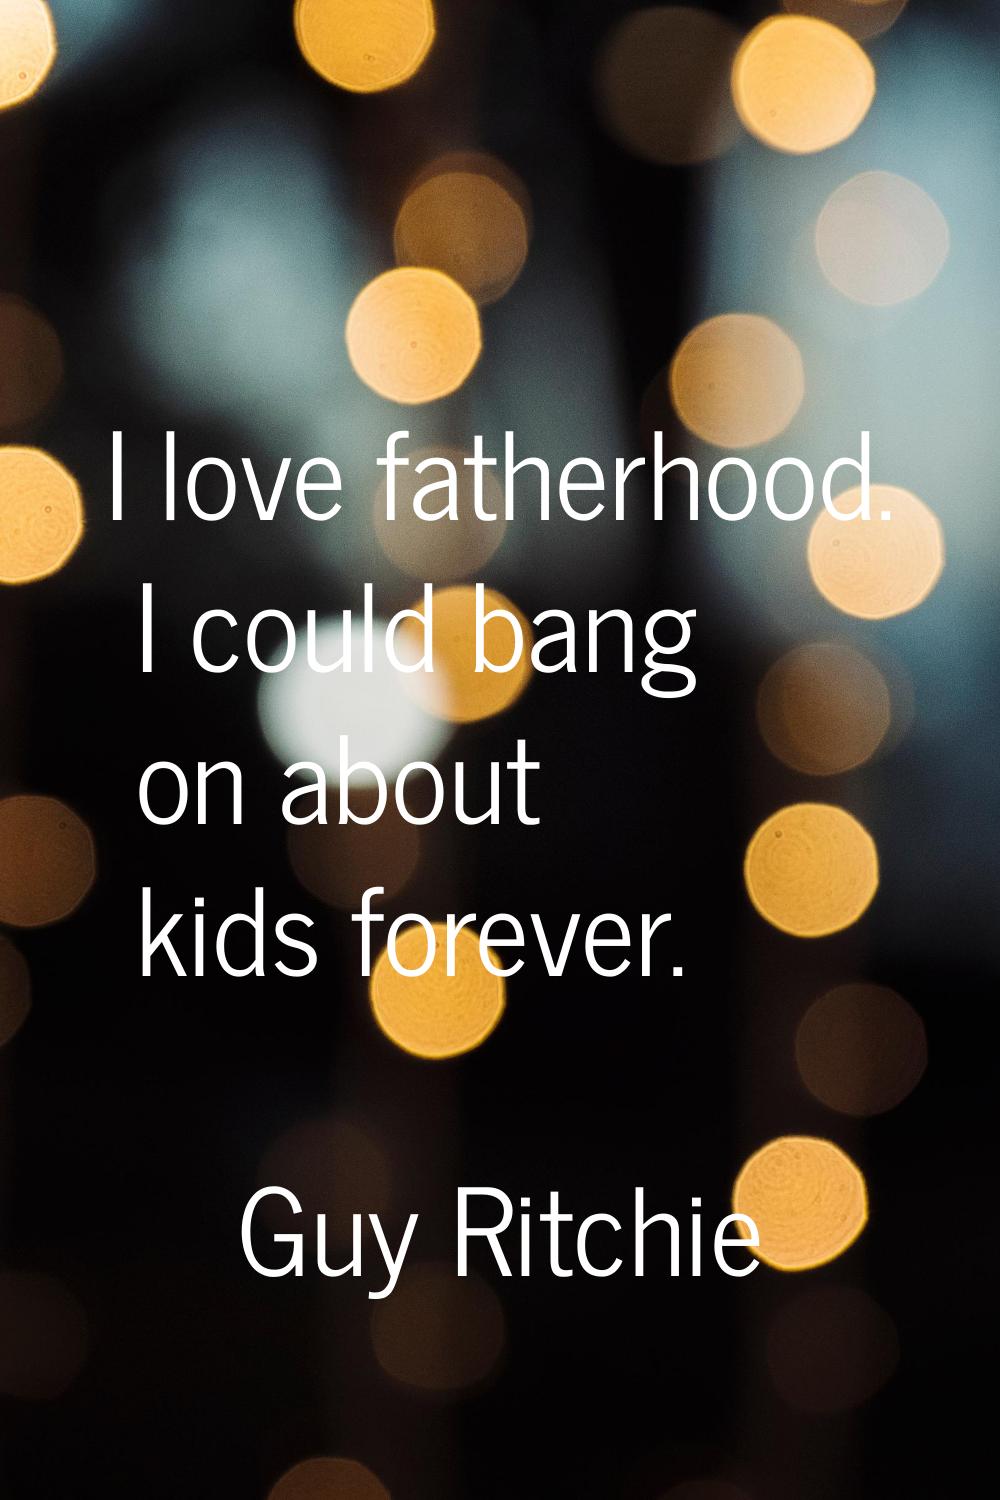 I love fatherhood. I could bang on about kids forever.